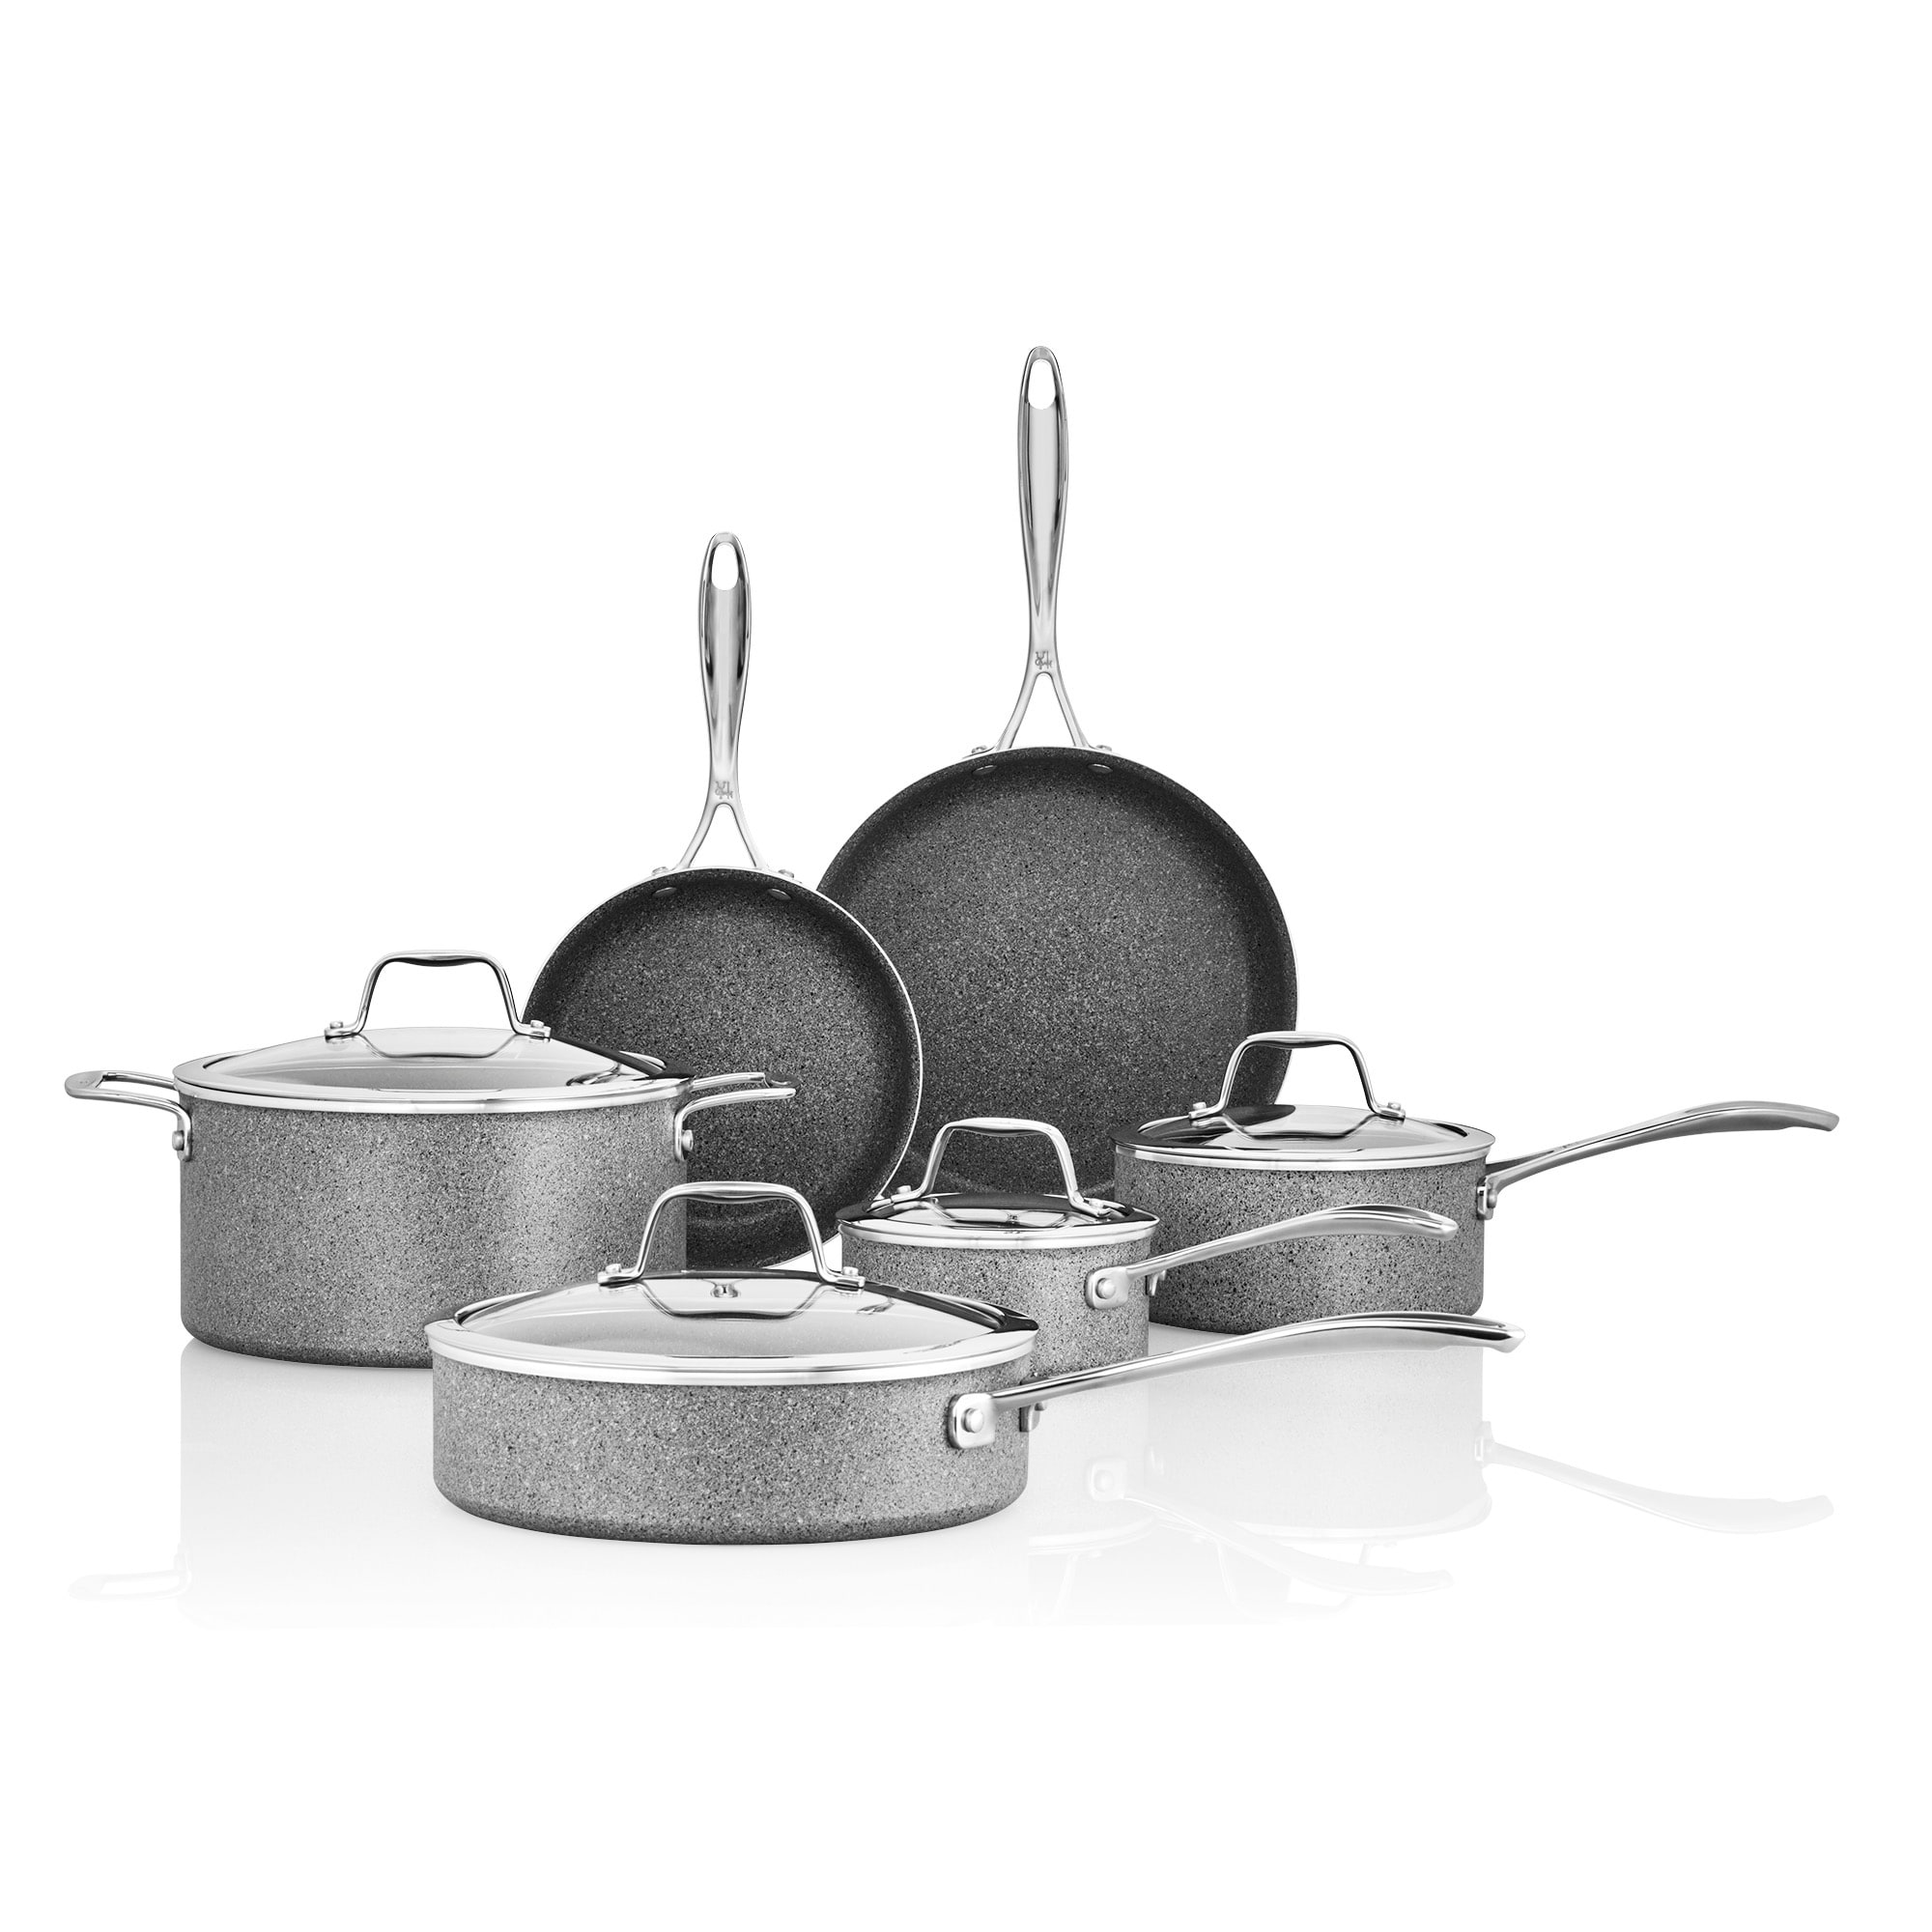 Granitestone Stackmaster 15 Piece Induction - Compatible Nonstick Cookware Set Scratch - Resistant Granite - Coated Anodized